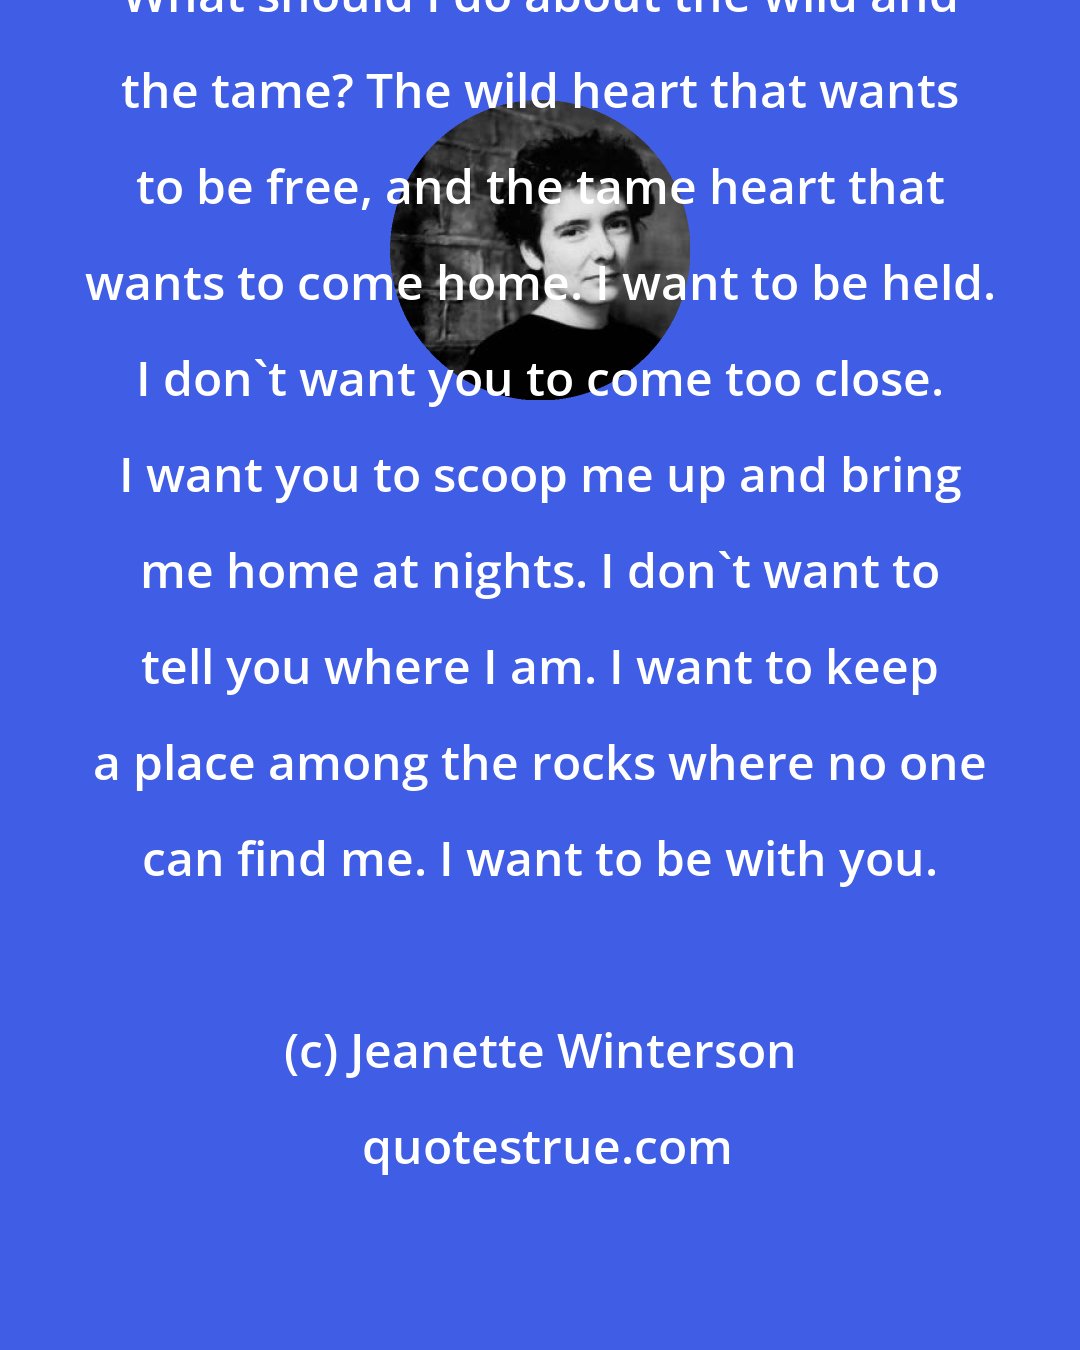 Jeanette Winterson: What should I do about the wild and the tame? The wild heart that wants to be free, and the tame heart that wants to come home. I want to be held. I don't want you to come too close. I want you to scoop me up and bring me home at nights. I don't want to tell you where I am. I want to keep a place among the rocks where no one can find me. I want to be with you.